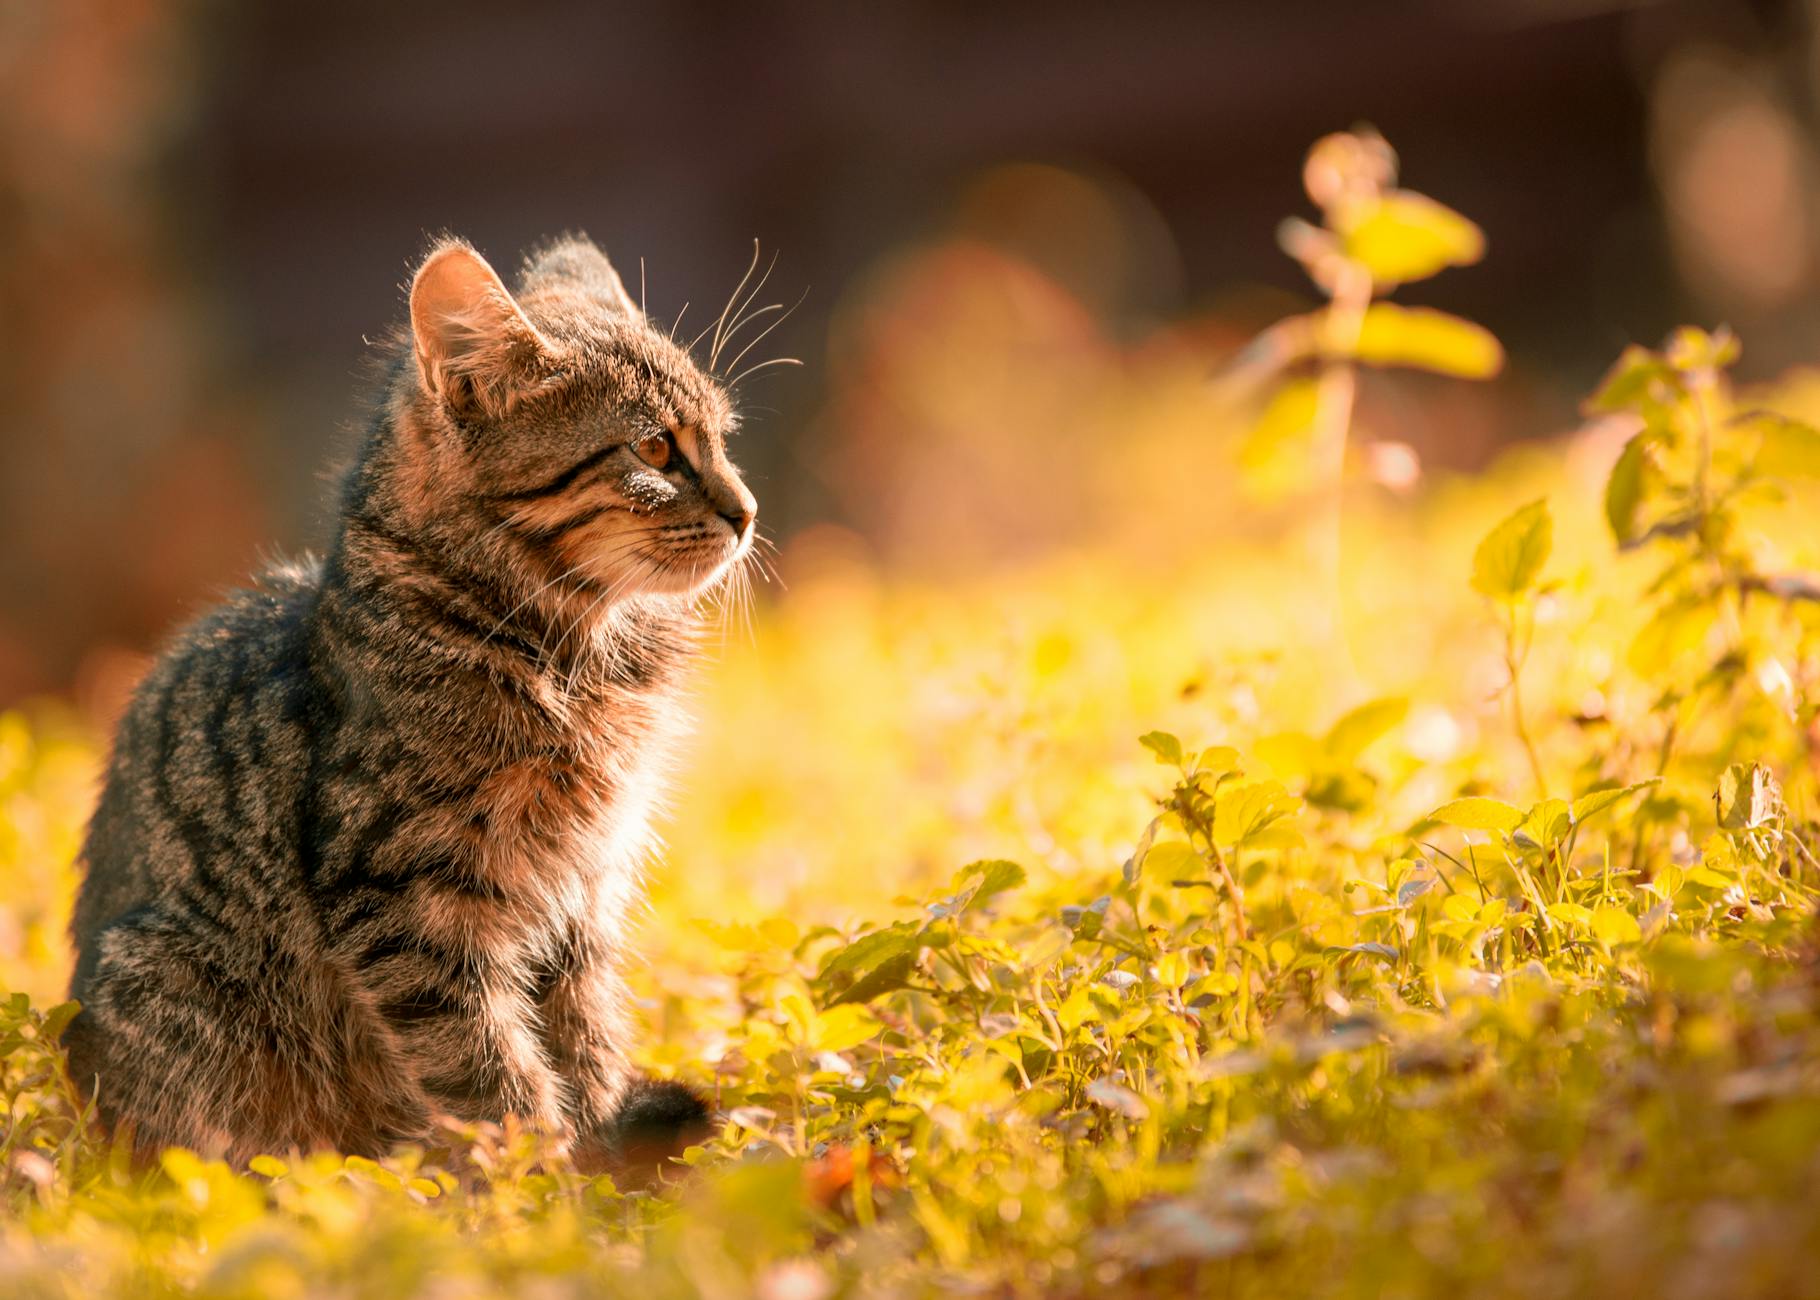 A purely decorative picture of a cat staring at a bunch of leaves.